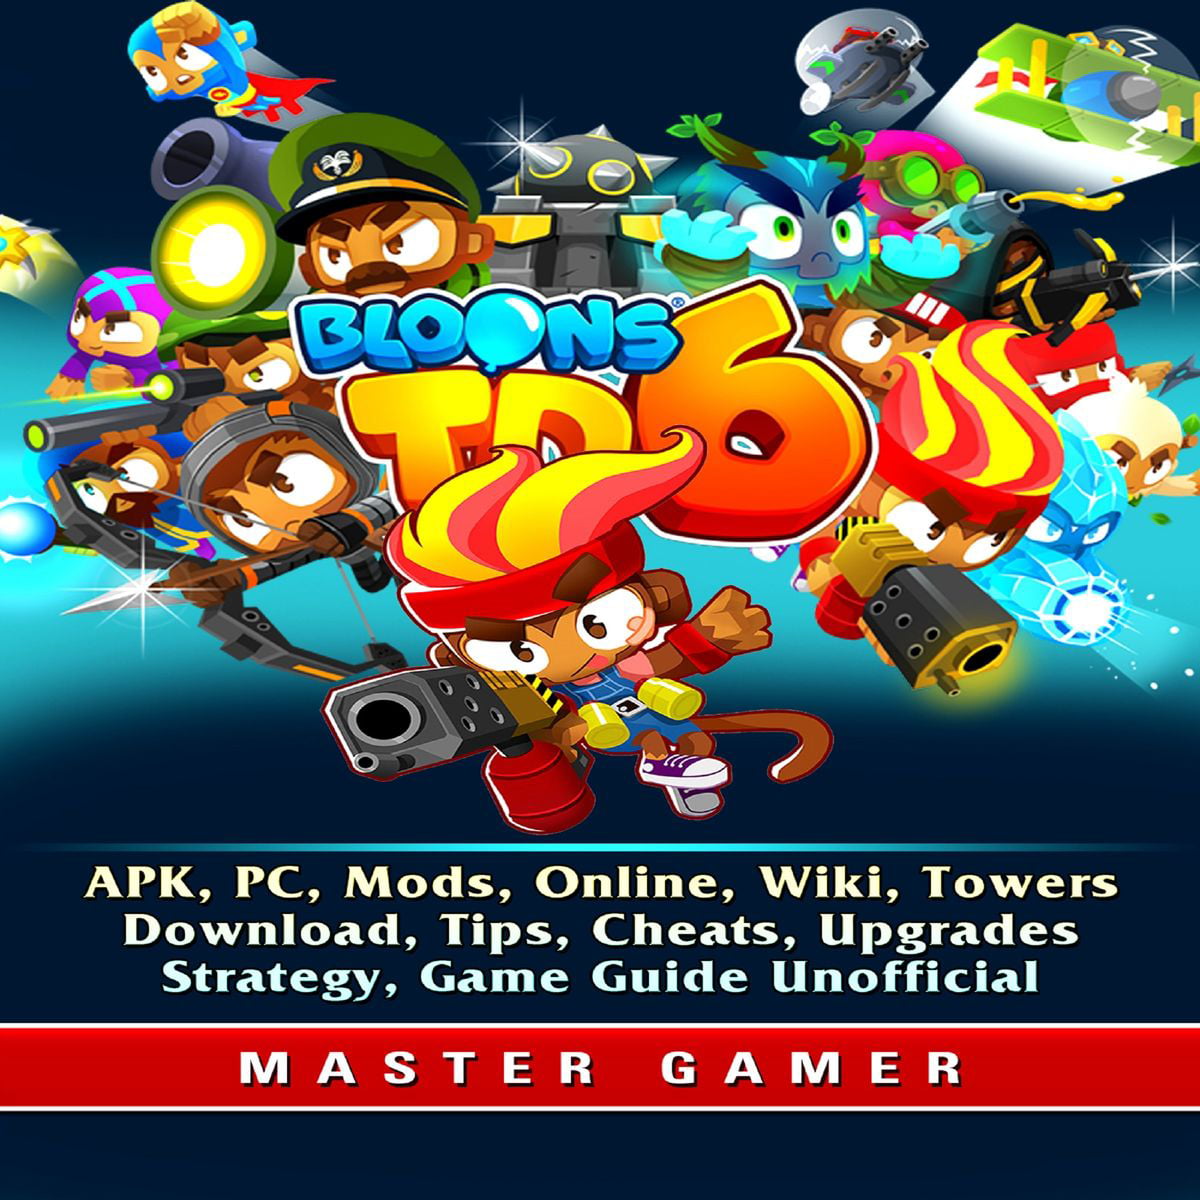 bloons td 6 cheat engine 2019